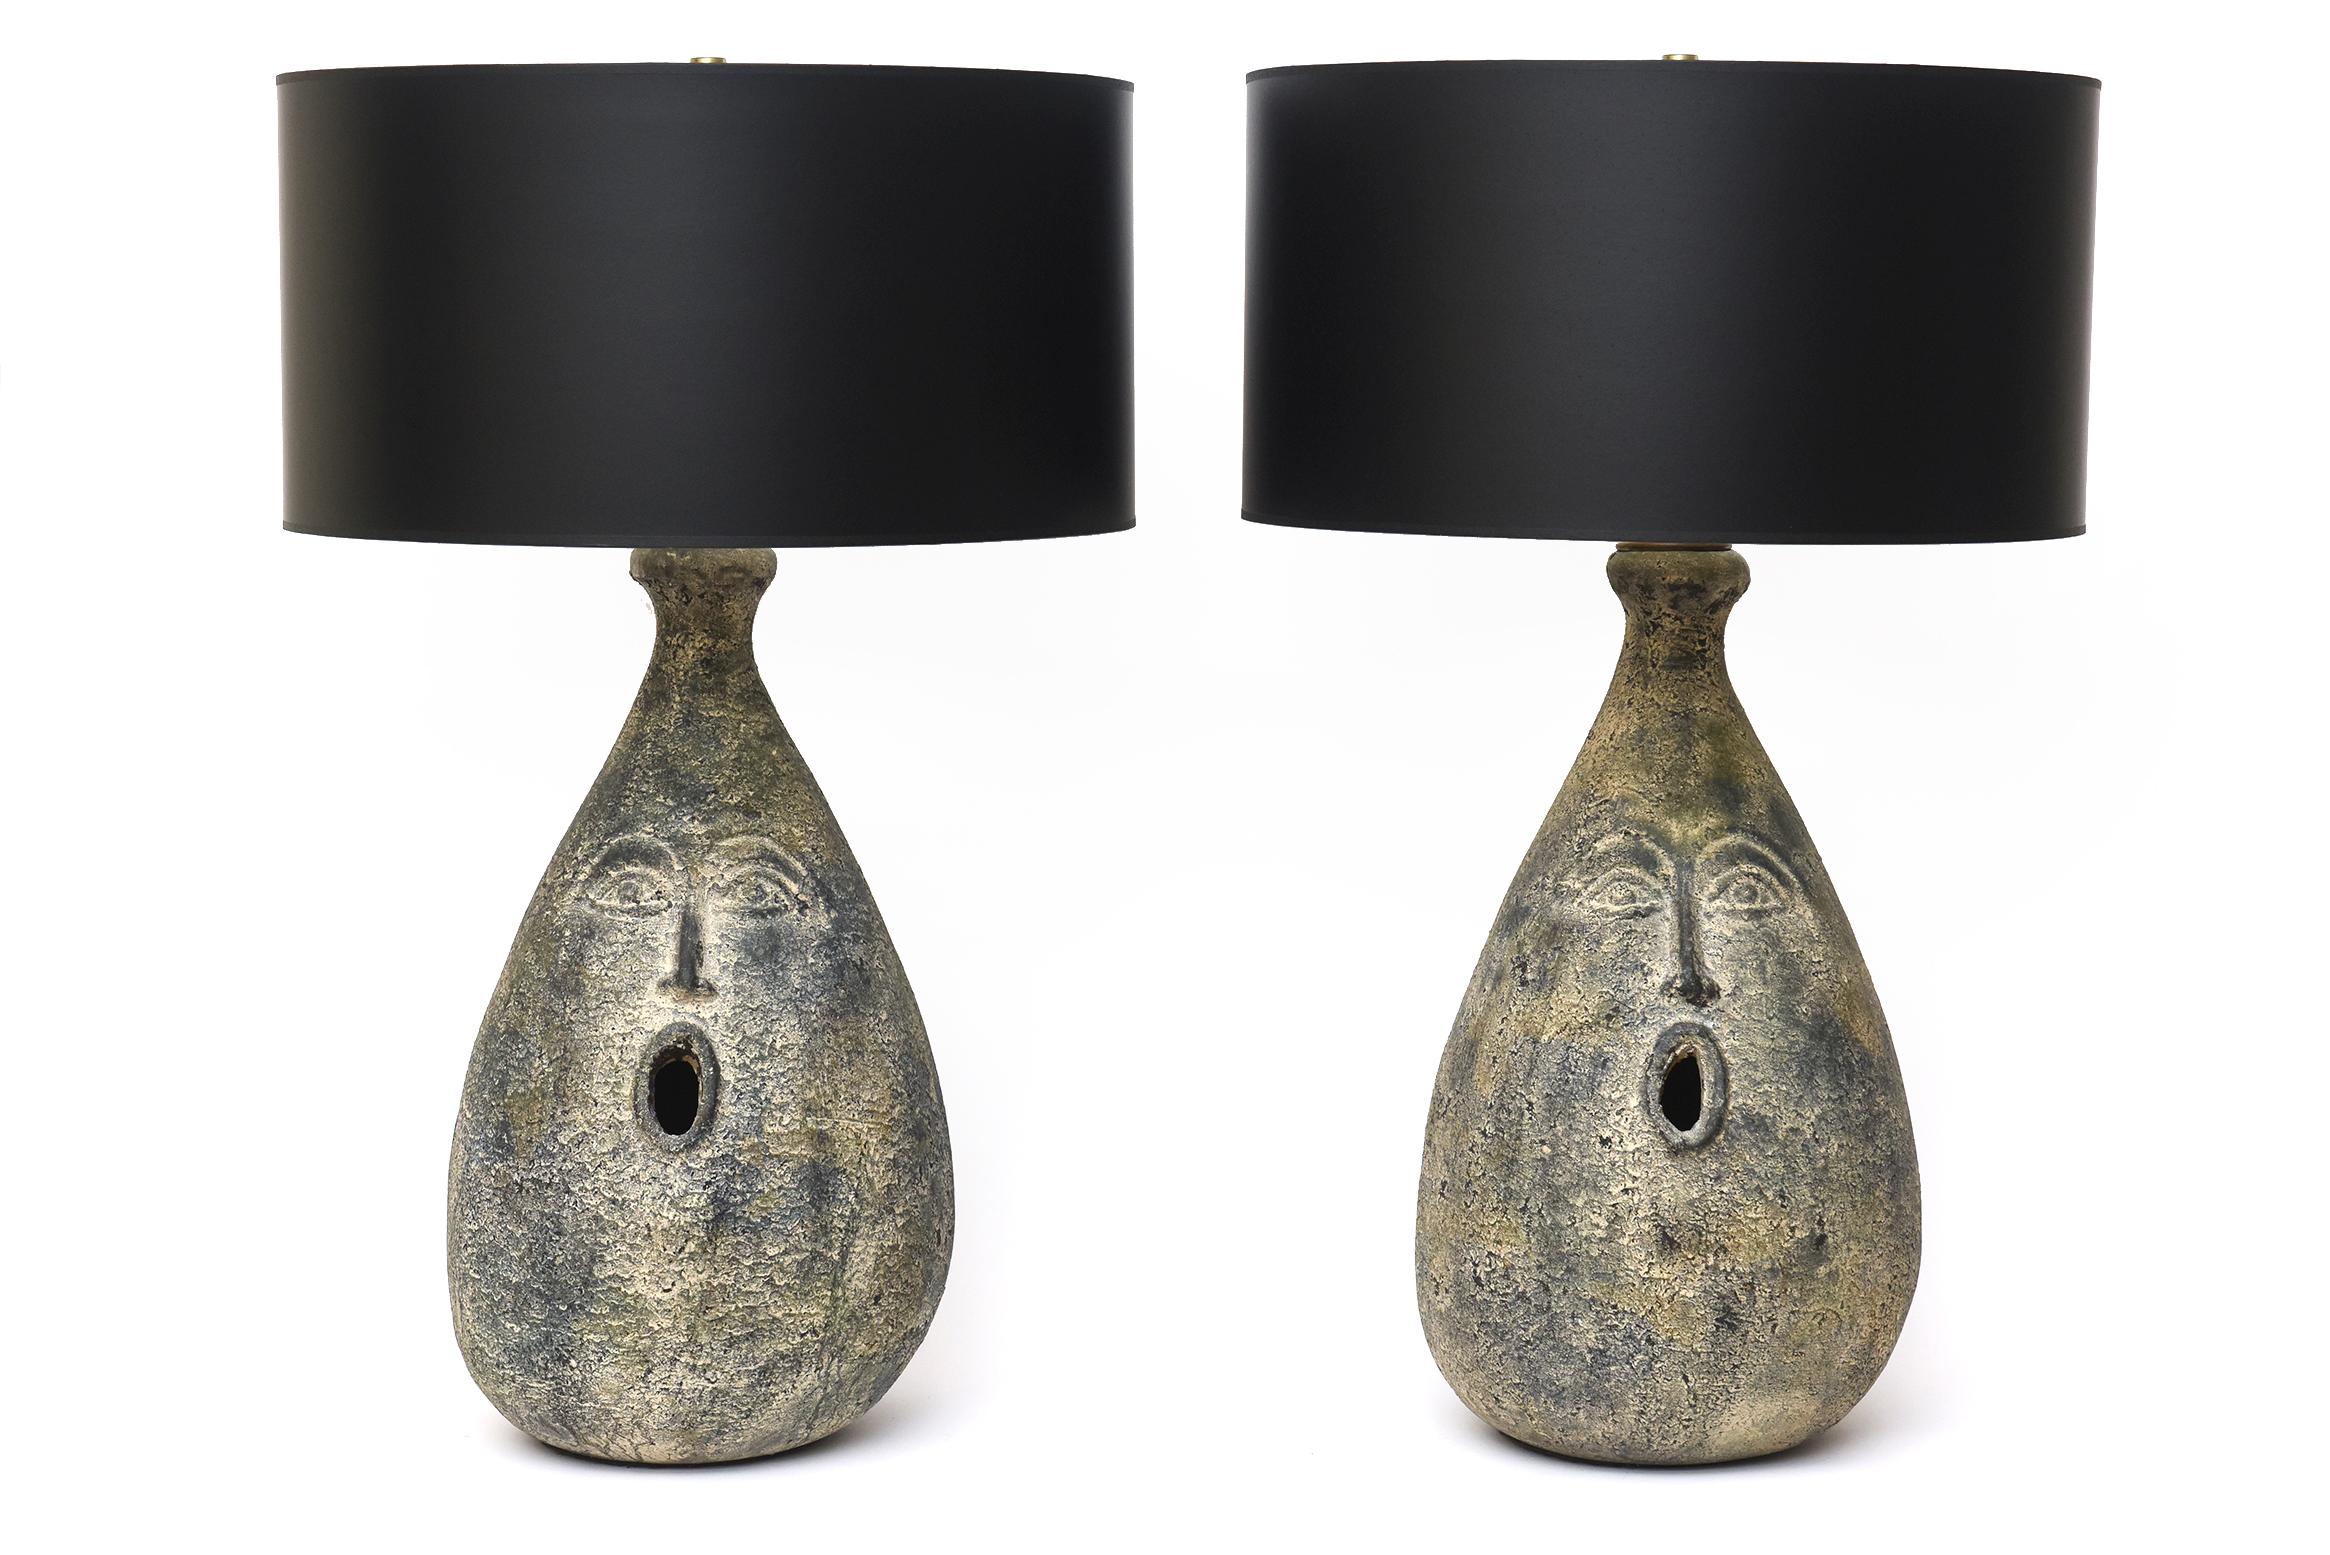 These amazing pair of French Mid-Century Modern face ceramic table or bedside lamps are conversational and very sophisticated. They are from the late 50's or early 60's. They are oh so clever in their subject matter and have a bit of whimsy mixed in